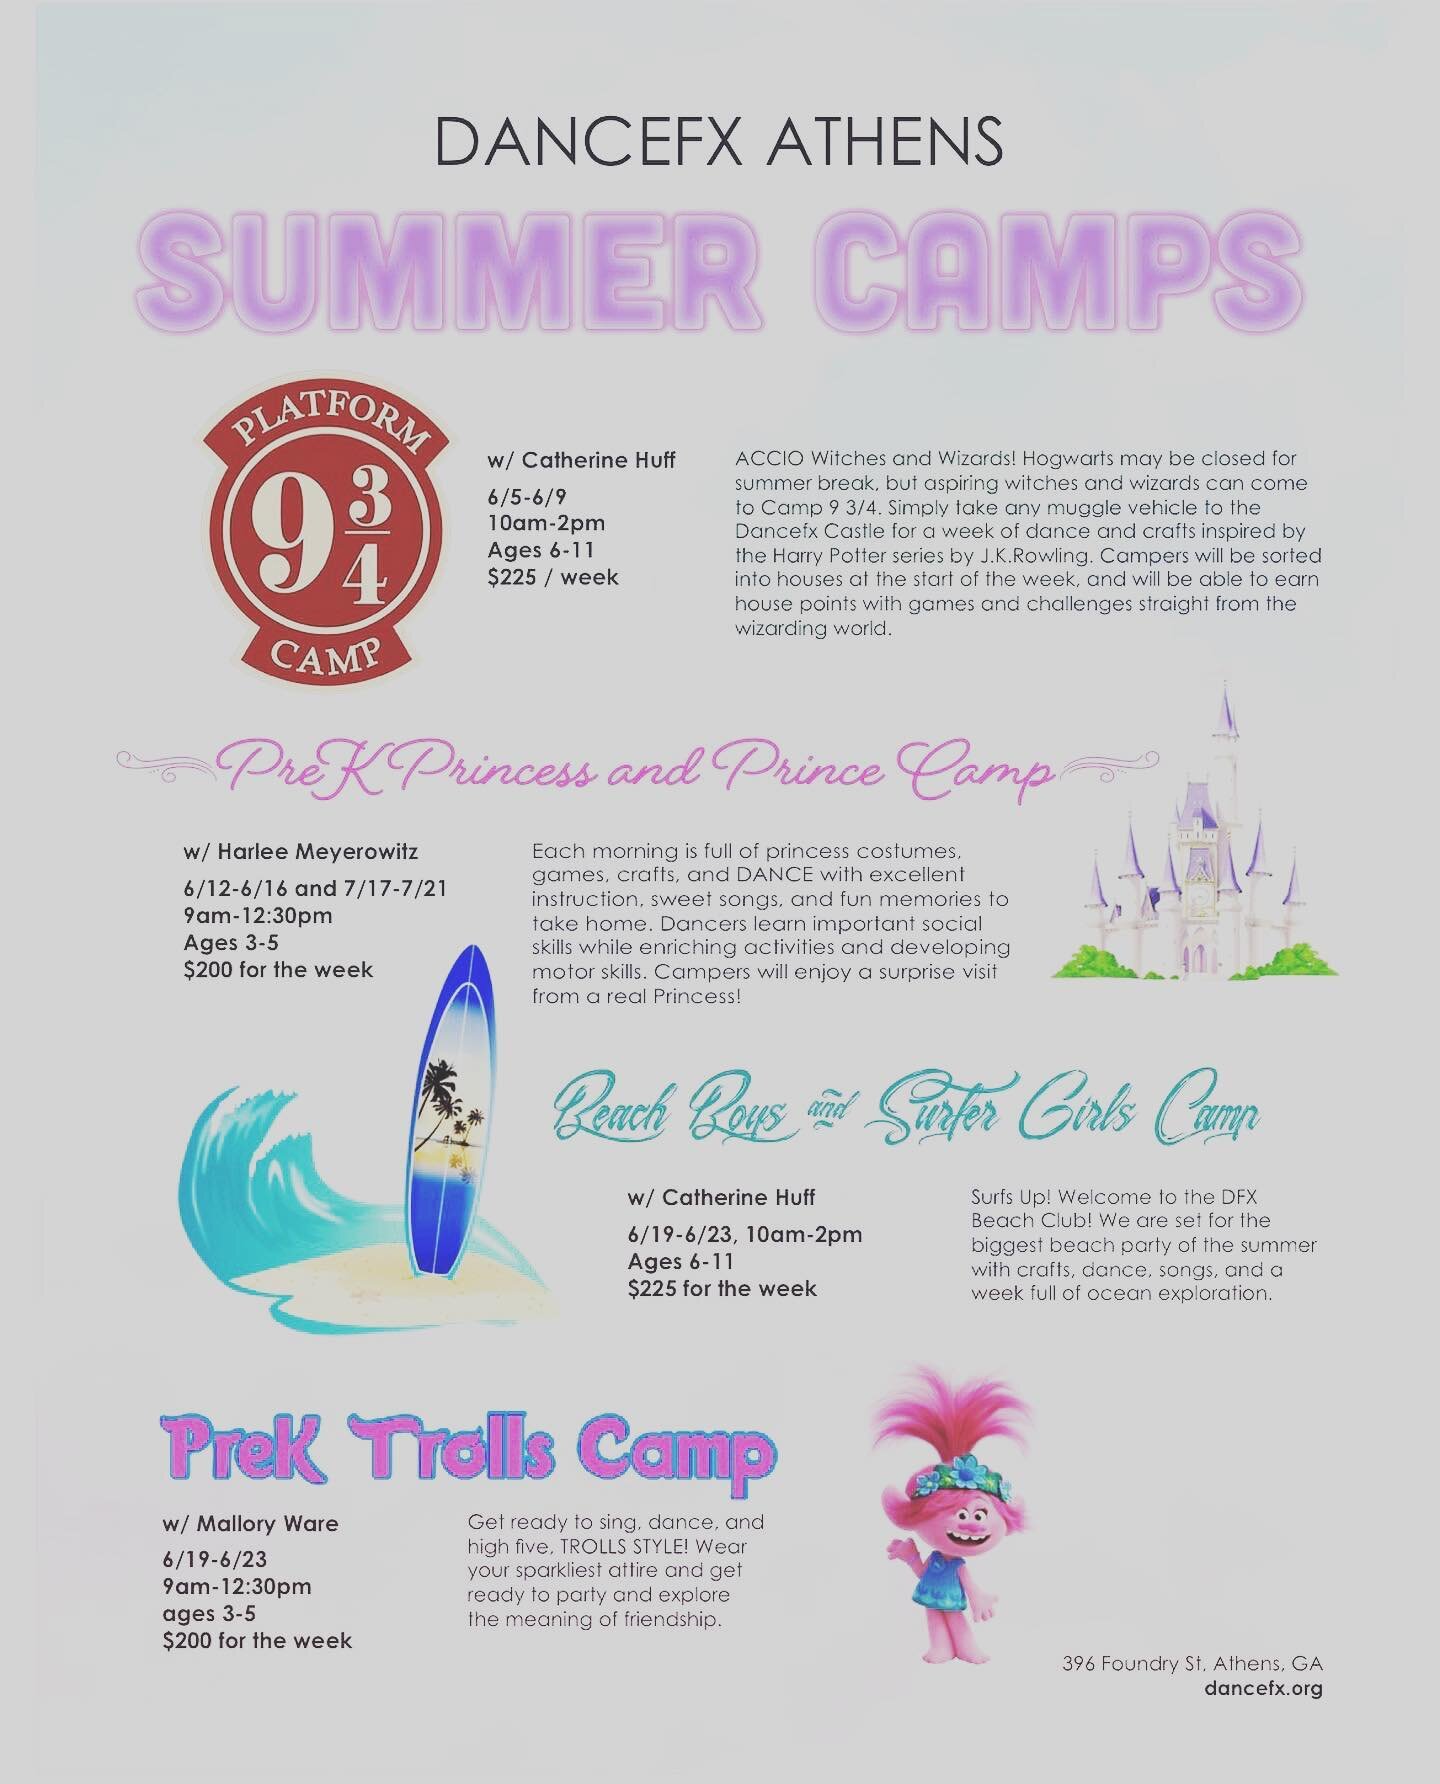 CALLING ALL WIZARDS! Last chance to register for Platform 9 3/4 Camp. Mrs. Catherine has an incredible week planned. The week starts by sorting all campers into their houses, and throughout the week, campers will earn points through magical games and